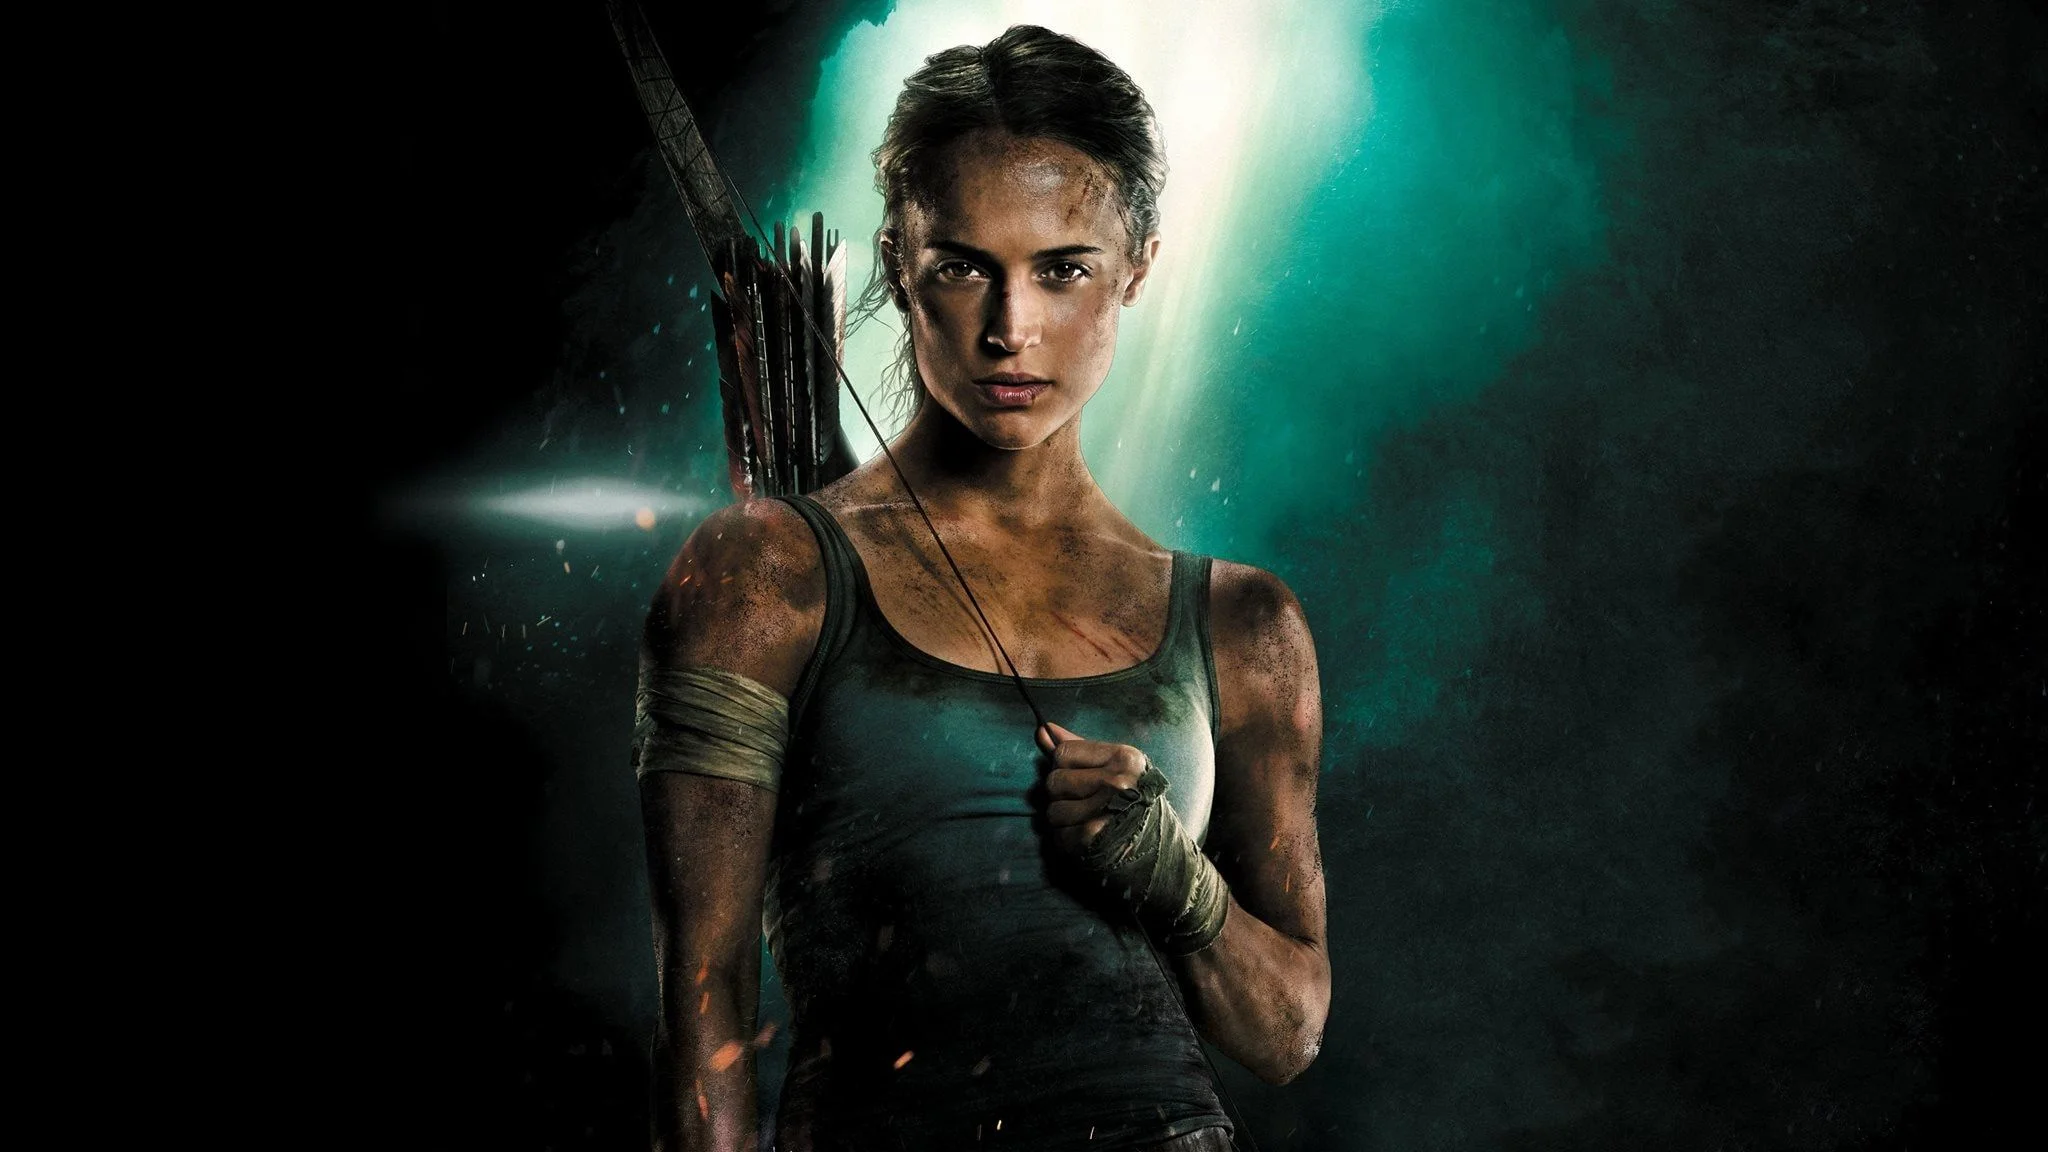 The sequel to the film about Lara Croft will not take place. The director of the failed tape spoke about the reasons for the cancellation